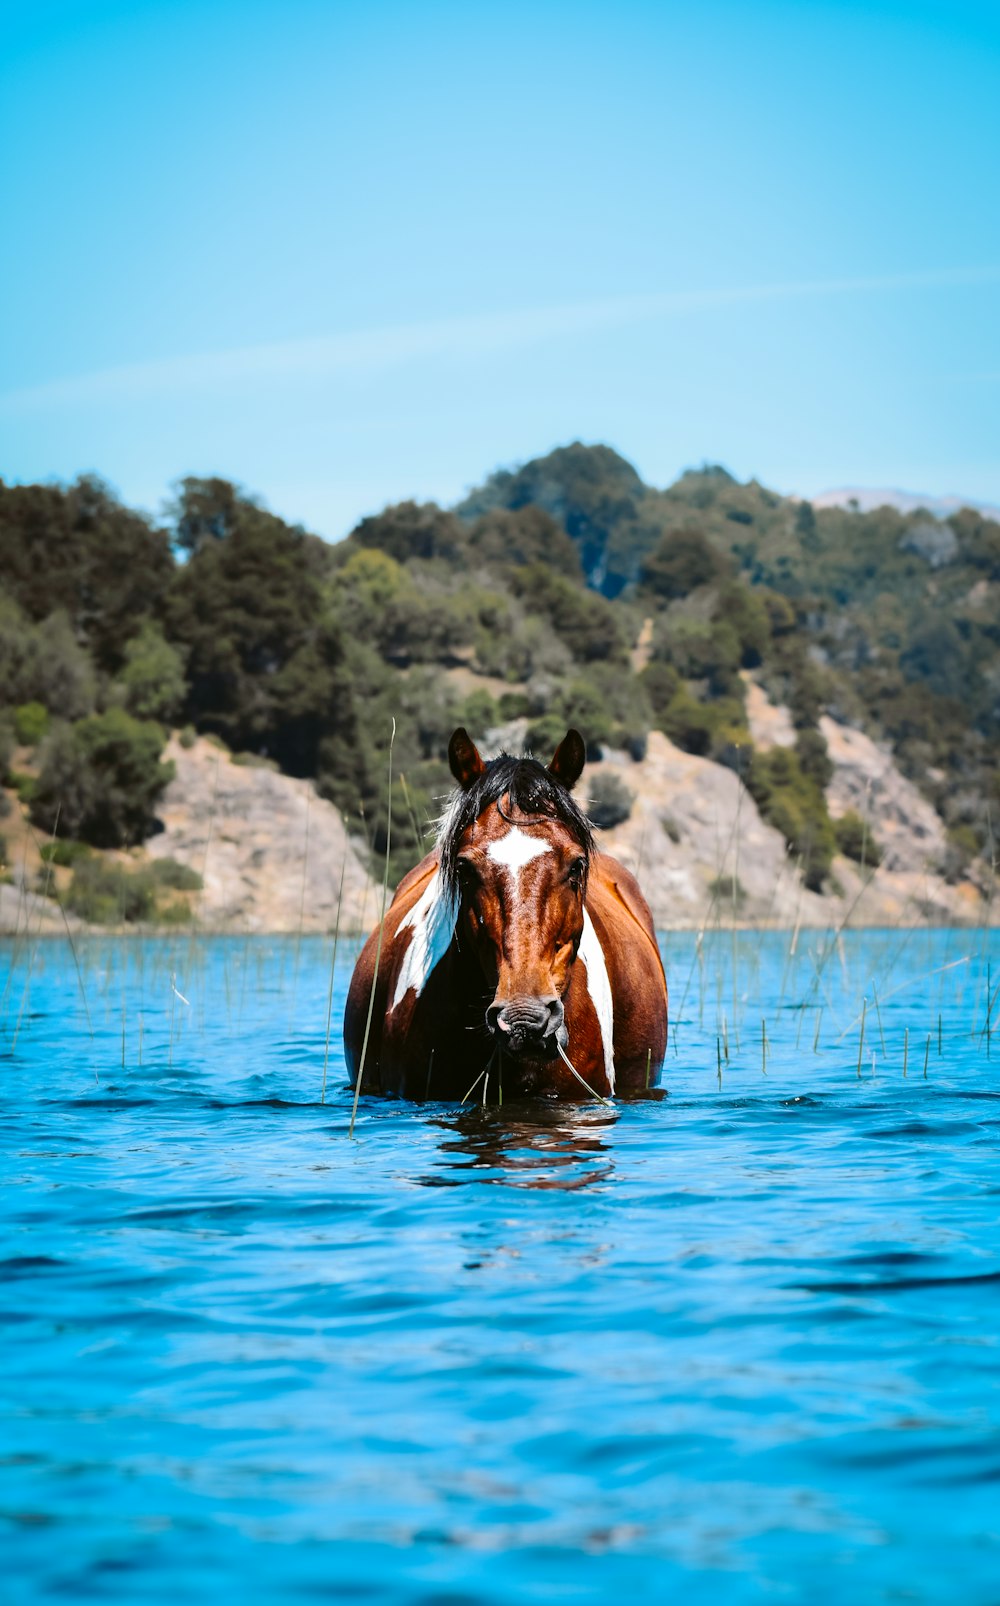 brown horse on water during daytime